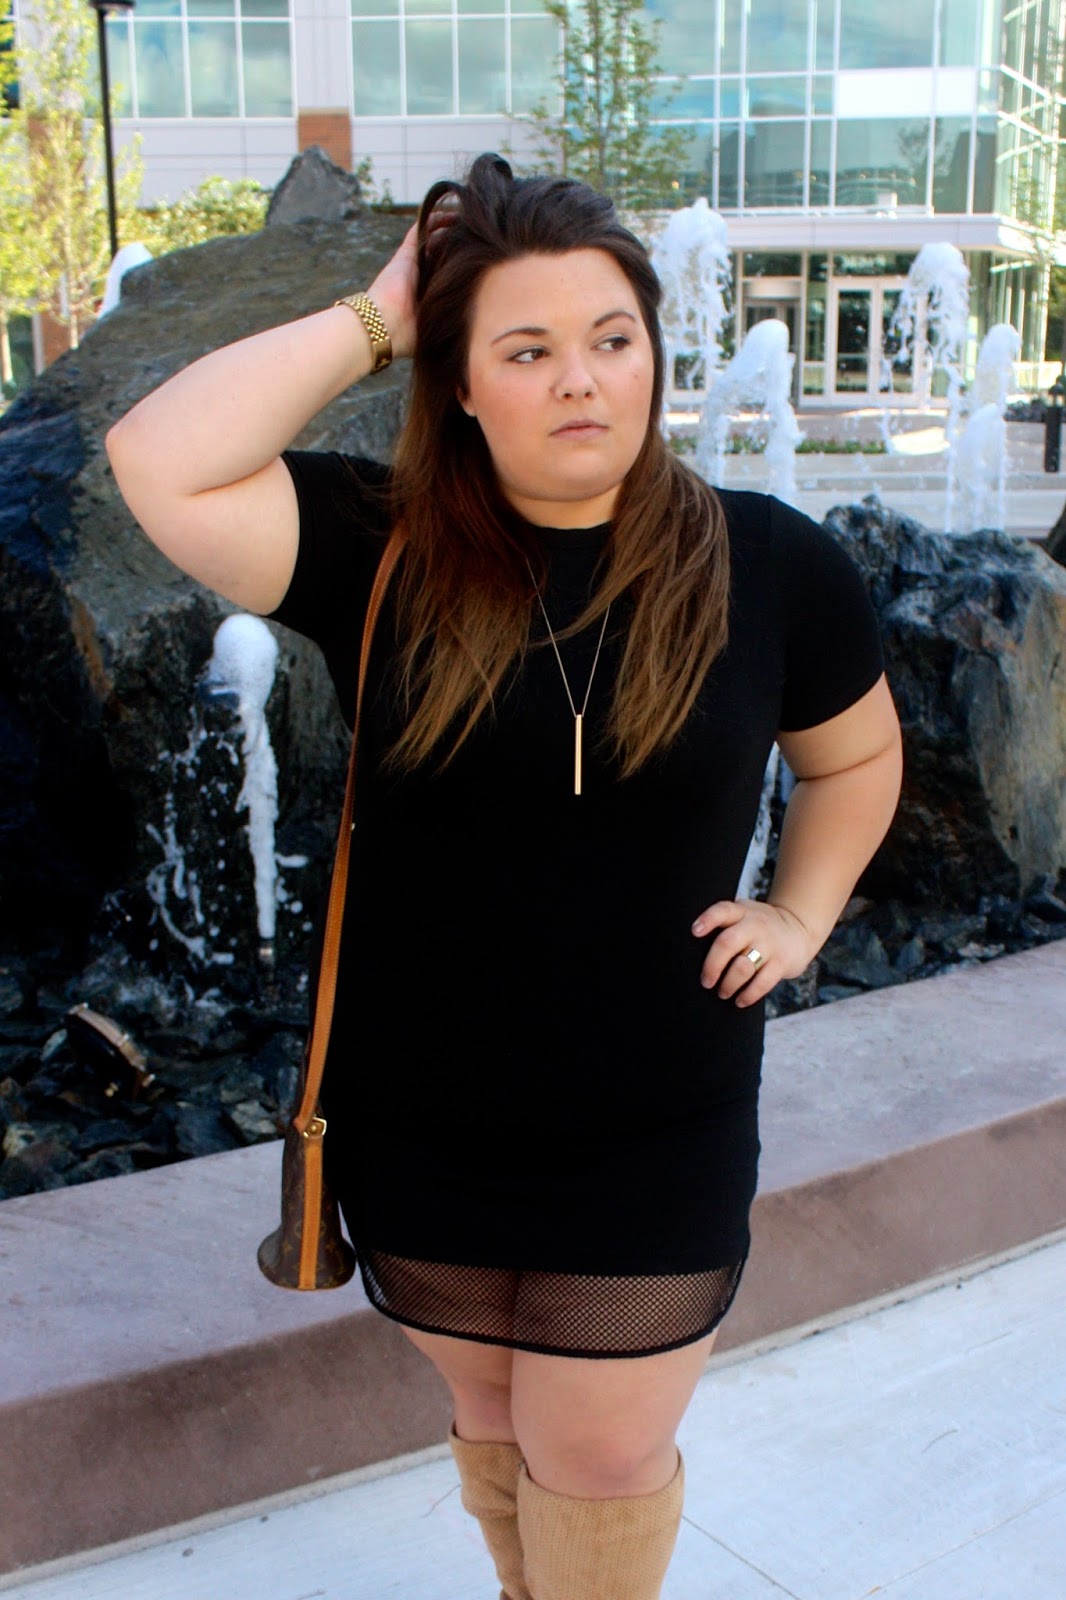 Natalie Craig, plus size fashion, ps fashion, little black dress, wearing black, natalie in the city, chicago, fashion blogger, plus size fashion blogger, forever 21, perforated boots, north and clybourne, perforated shoes, mesh dress, fatshion, confidence, louis vuitton, gold watch, woman within, wide calf boot, thick, wide calf